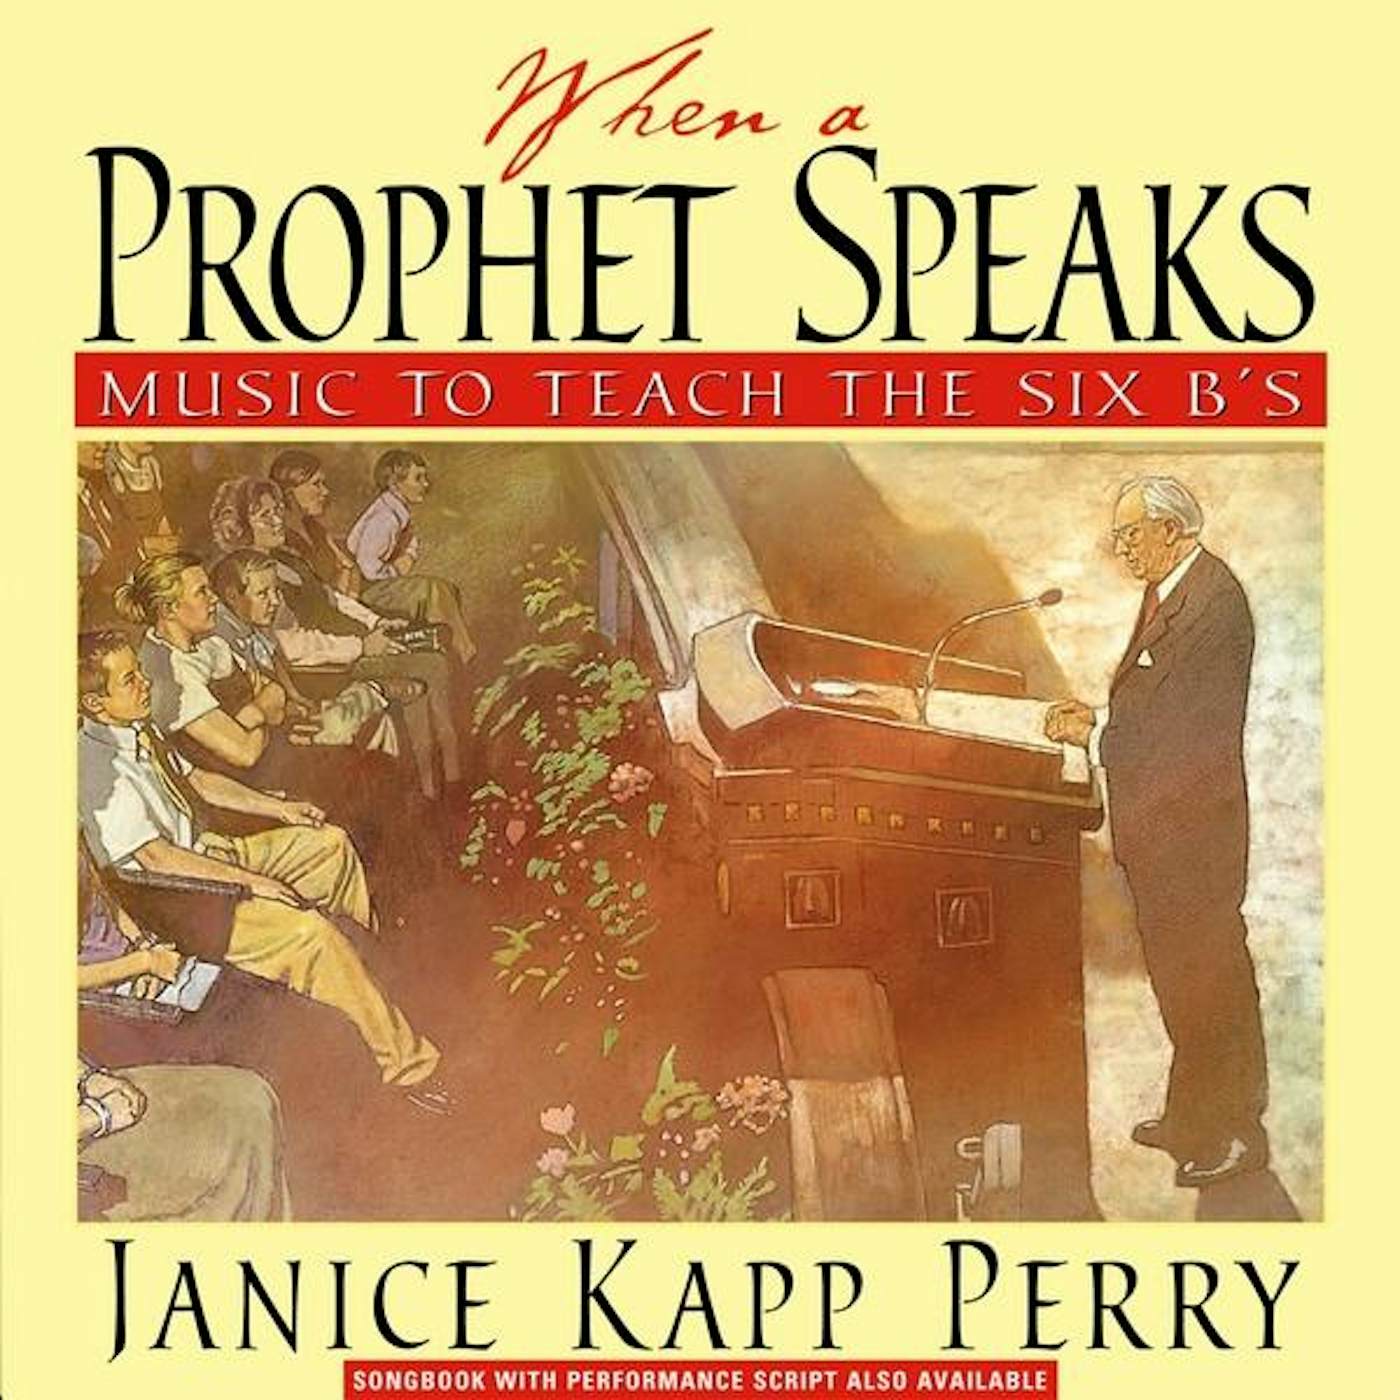 Janice Kapp Perry WHEN A PROPHET SPEAKS: MUSIC TO TEACH THE SIX B'S CD